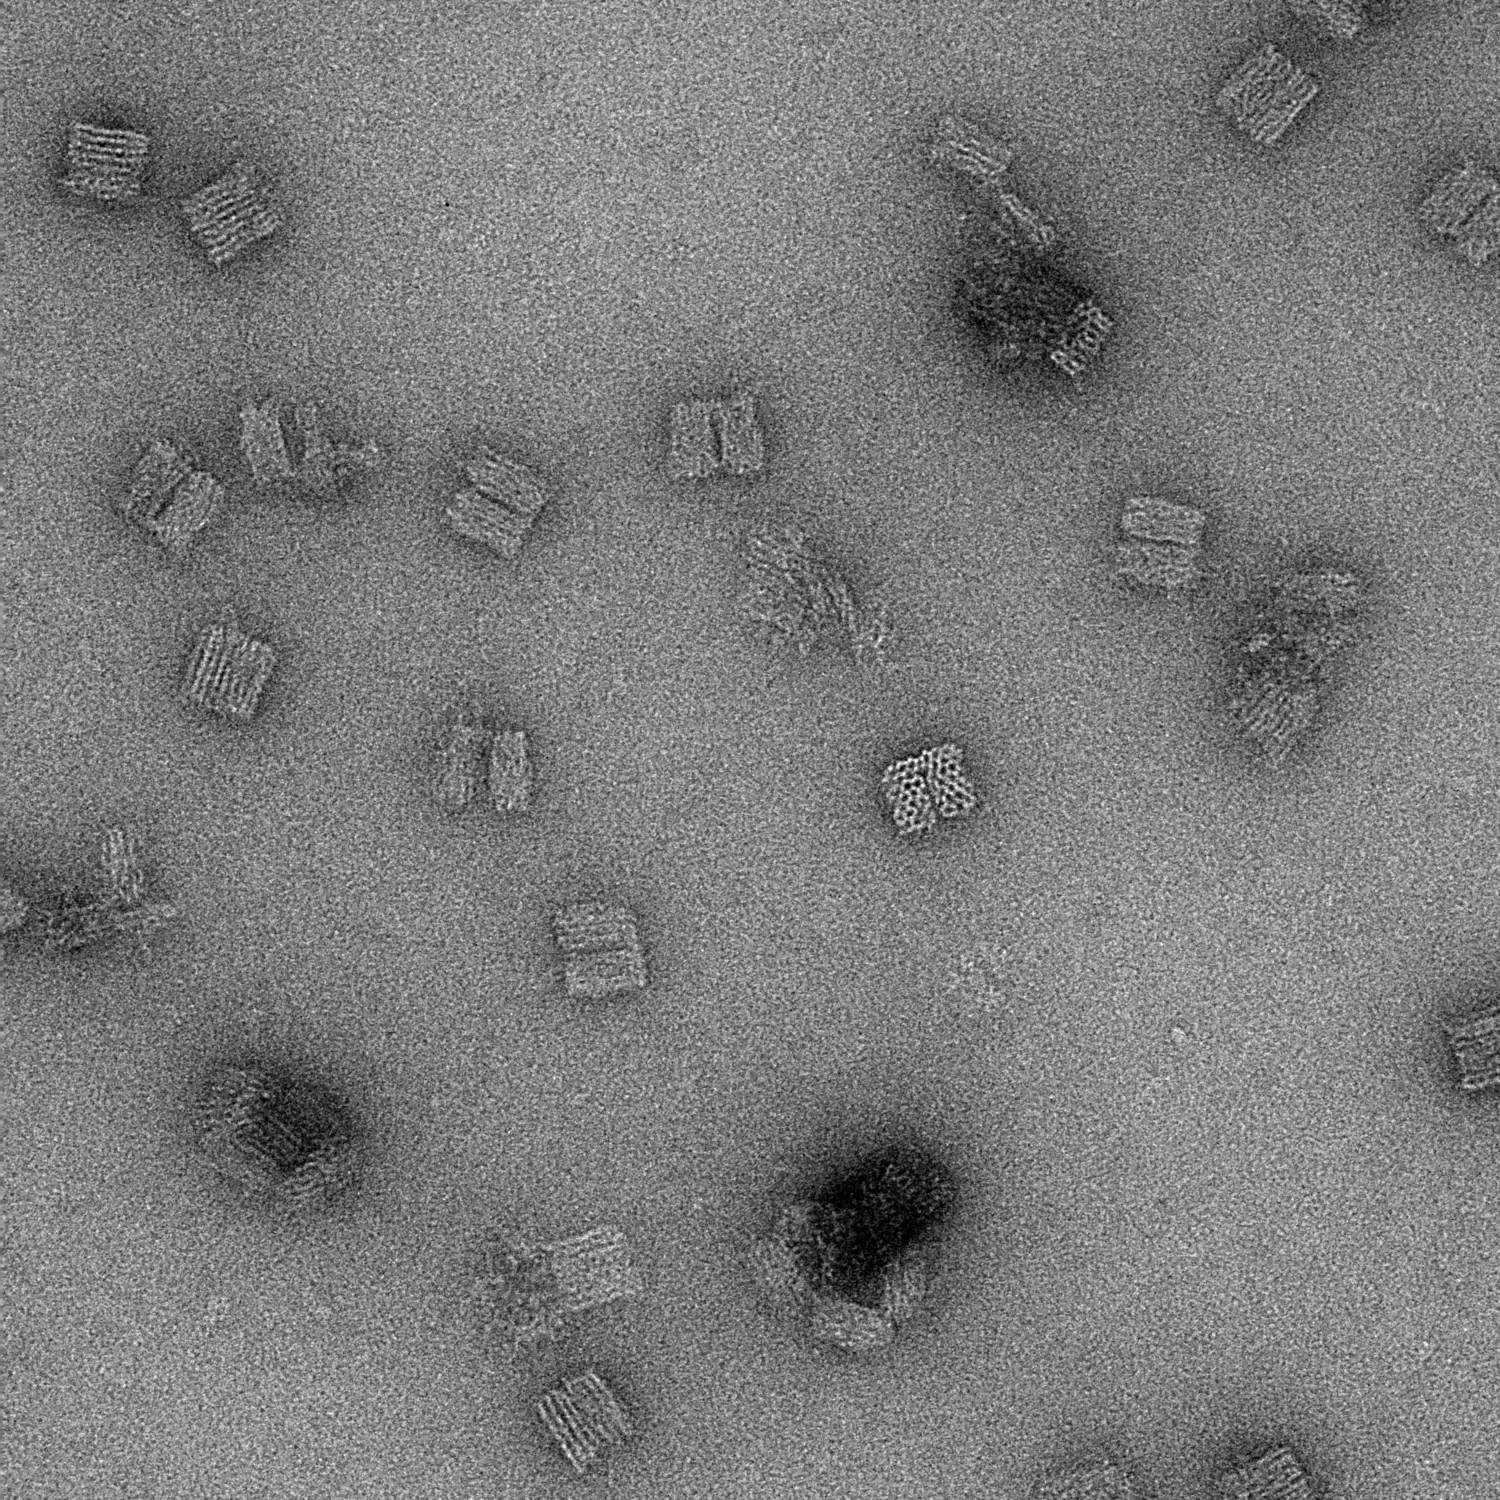 Negative stain EM of DNA origami, collected at the 3D-EM Core Facility.